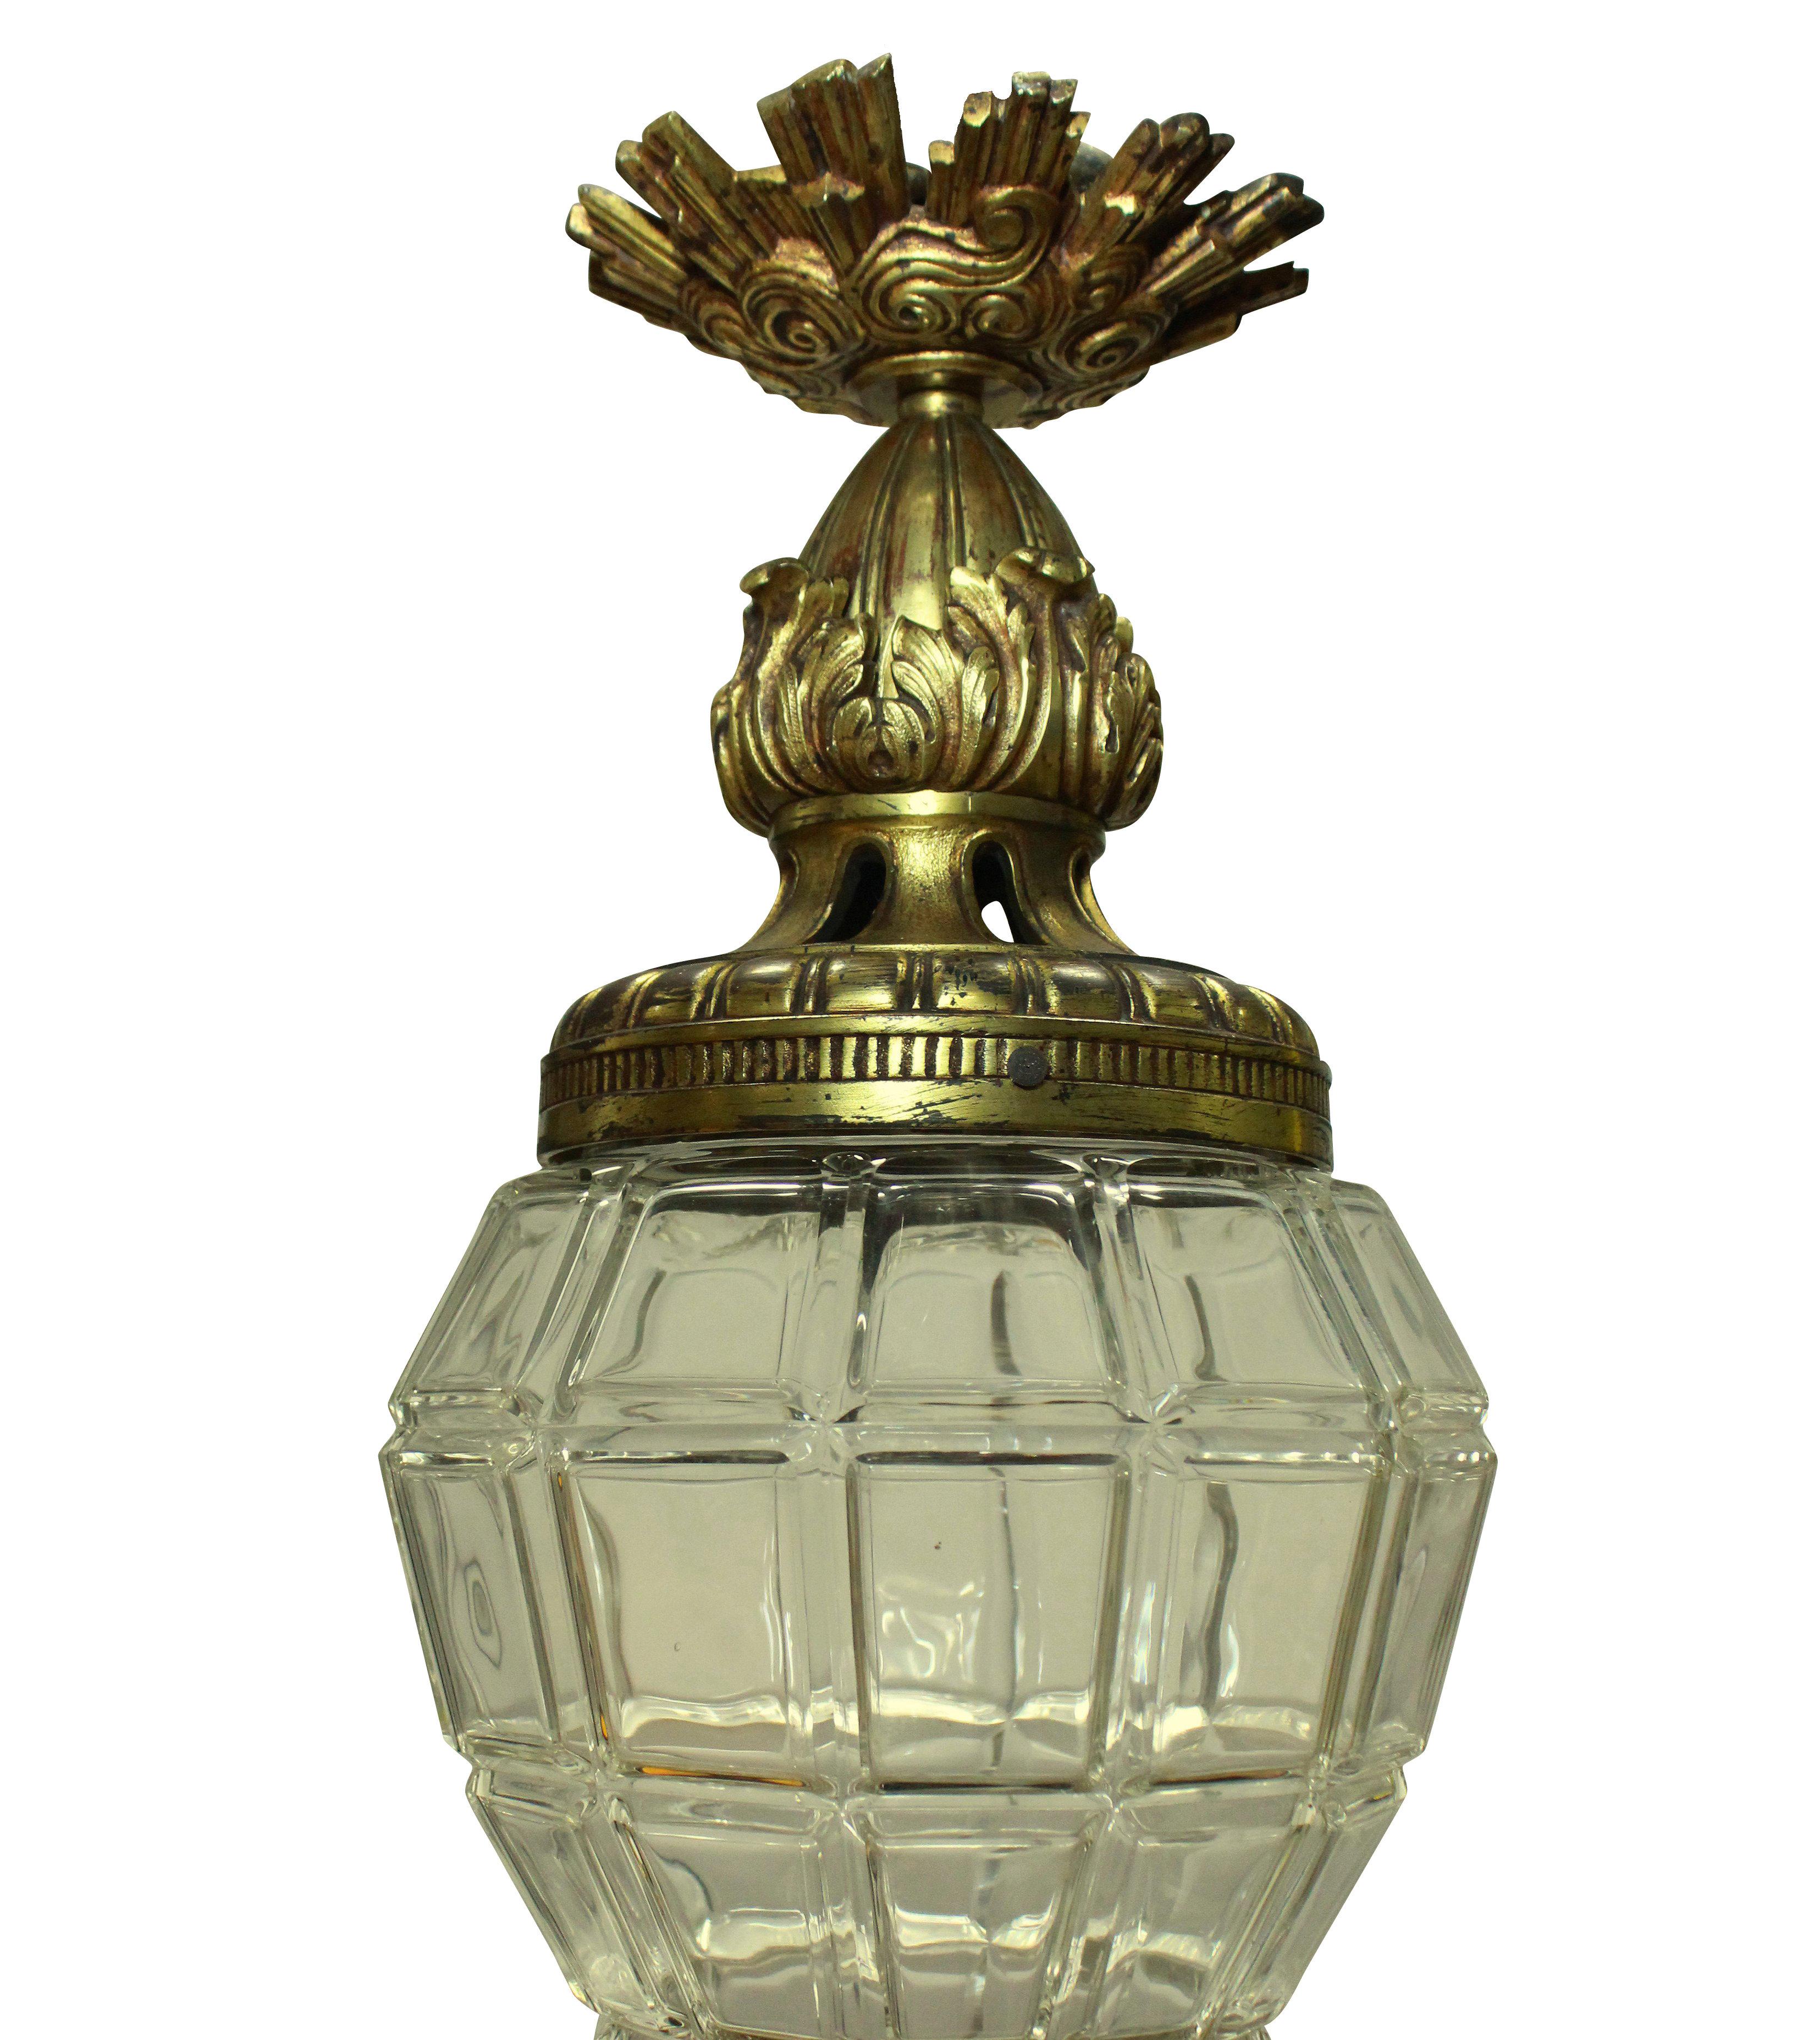 A French gilt bronze and glass lantern, modelled on the lanterns at Versaille, the canopy having sun rays.